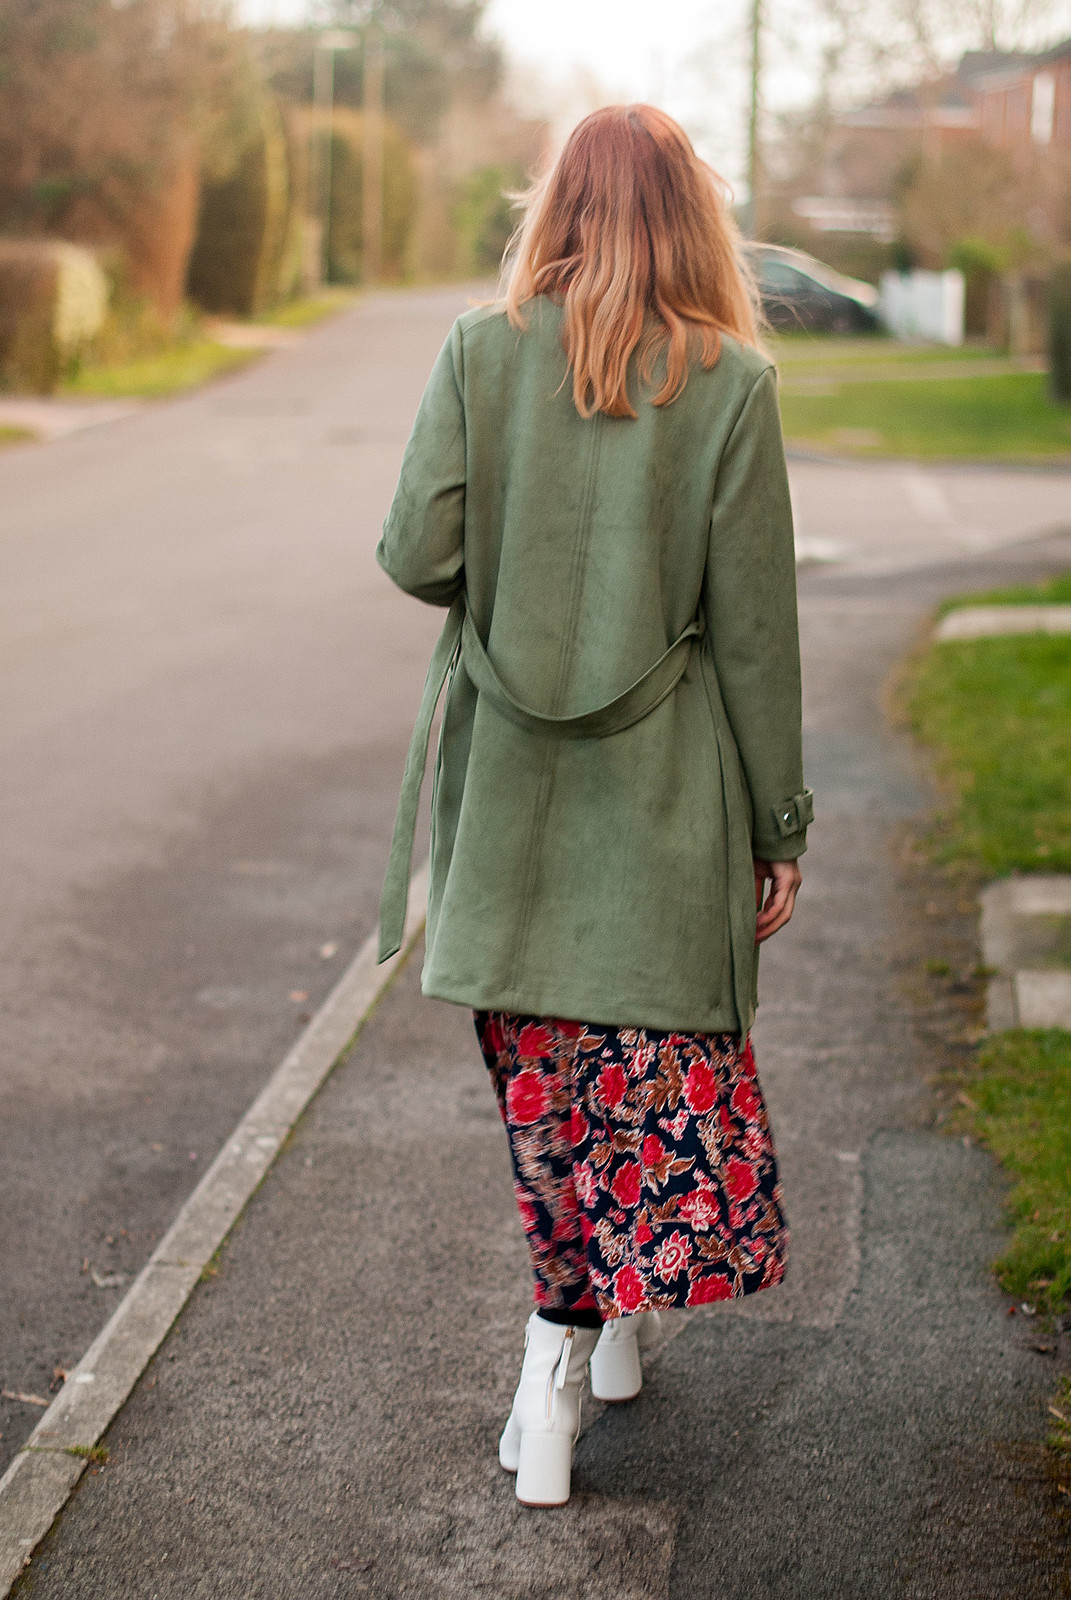 Floral maxi dress and white boots with longline khaki jacket and tan bumbag | Over 40 style fashion | Not Dressed As Lamb